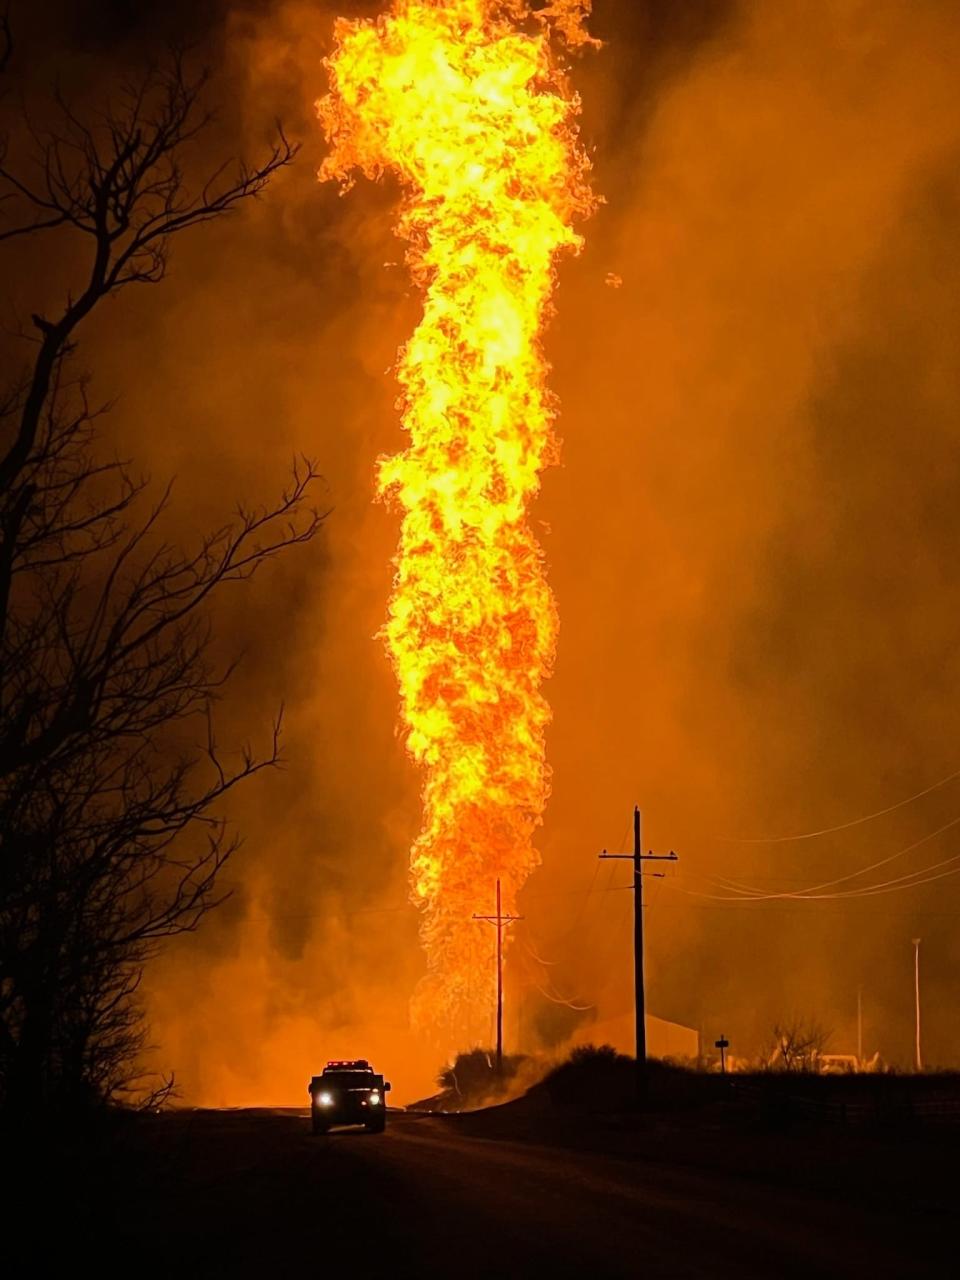 A pipeline explosion near the Oklahoma panhandle Tuesday night created flames over 500 feet tall.